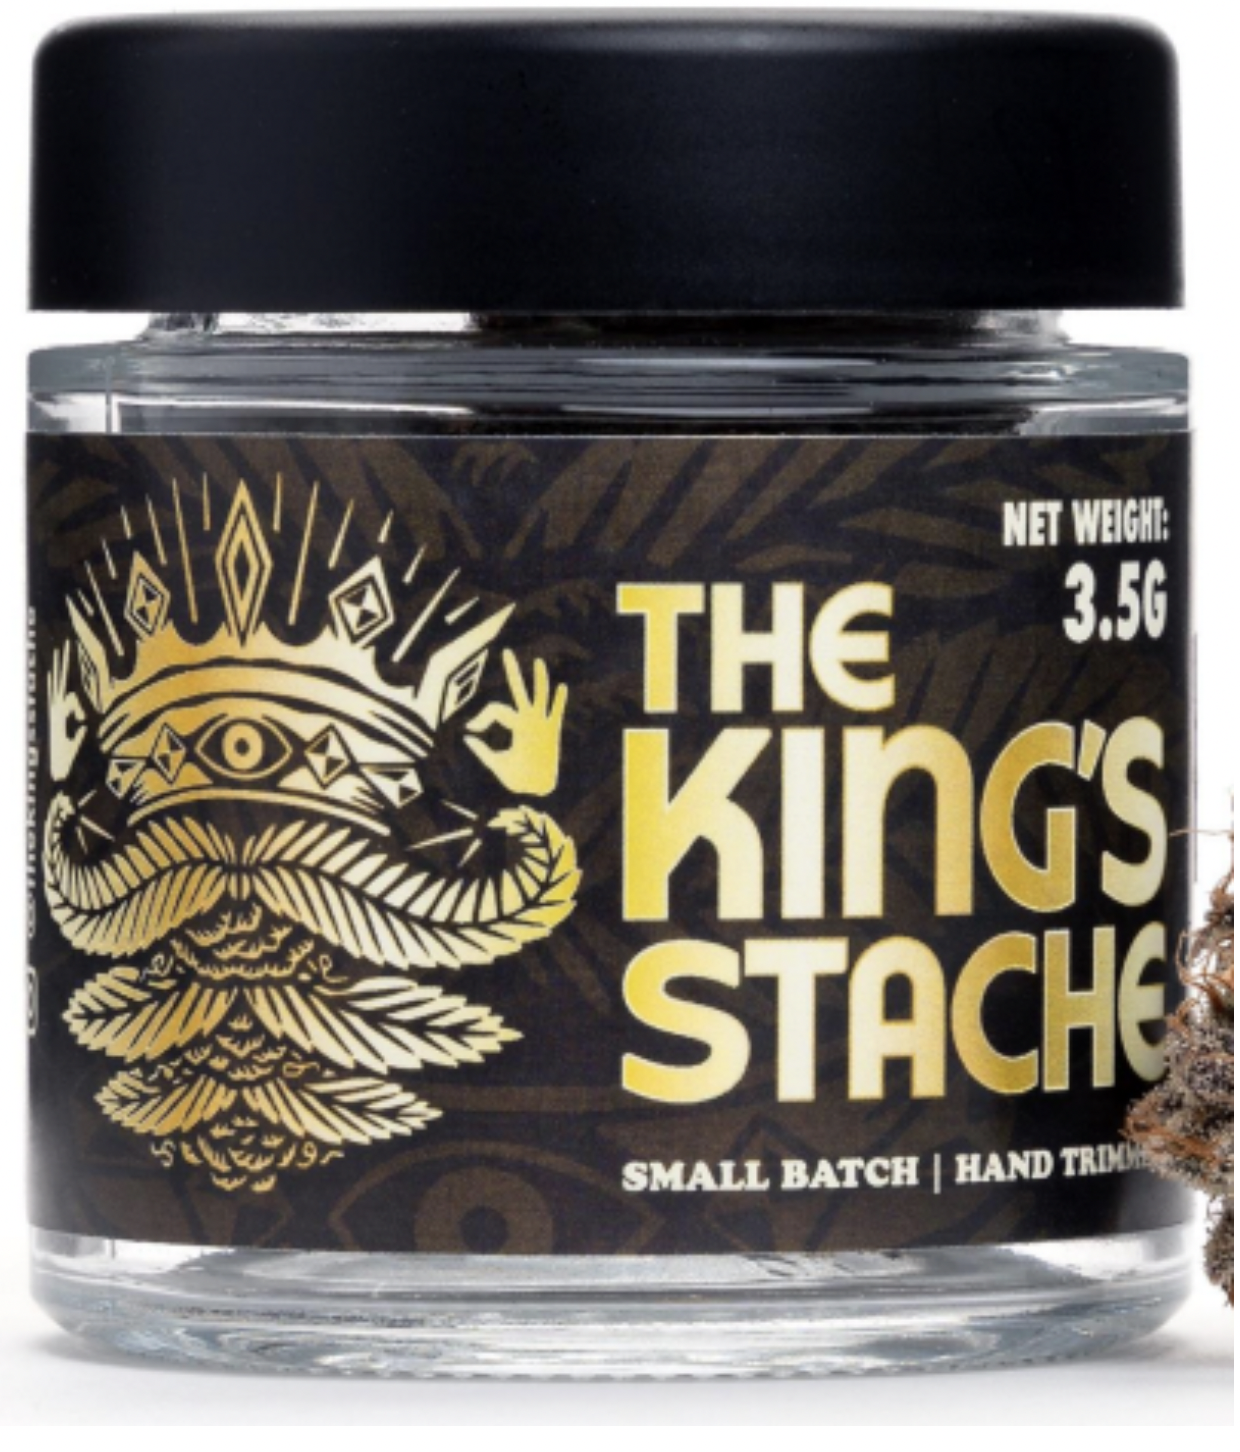 The King''s Stache Peanut Butter Chocolate